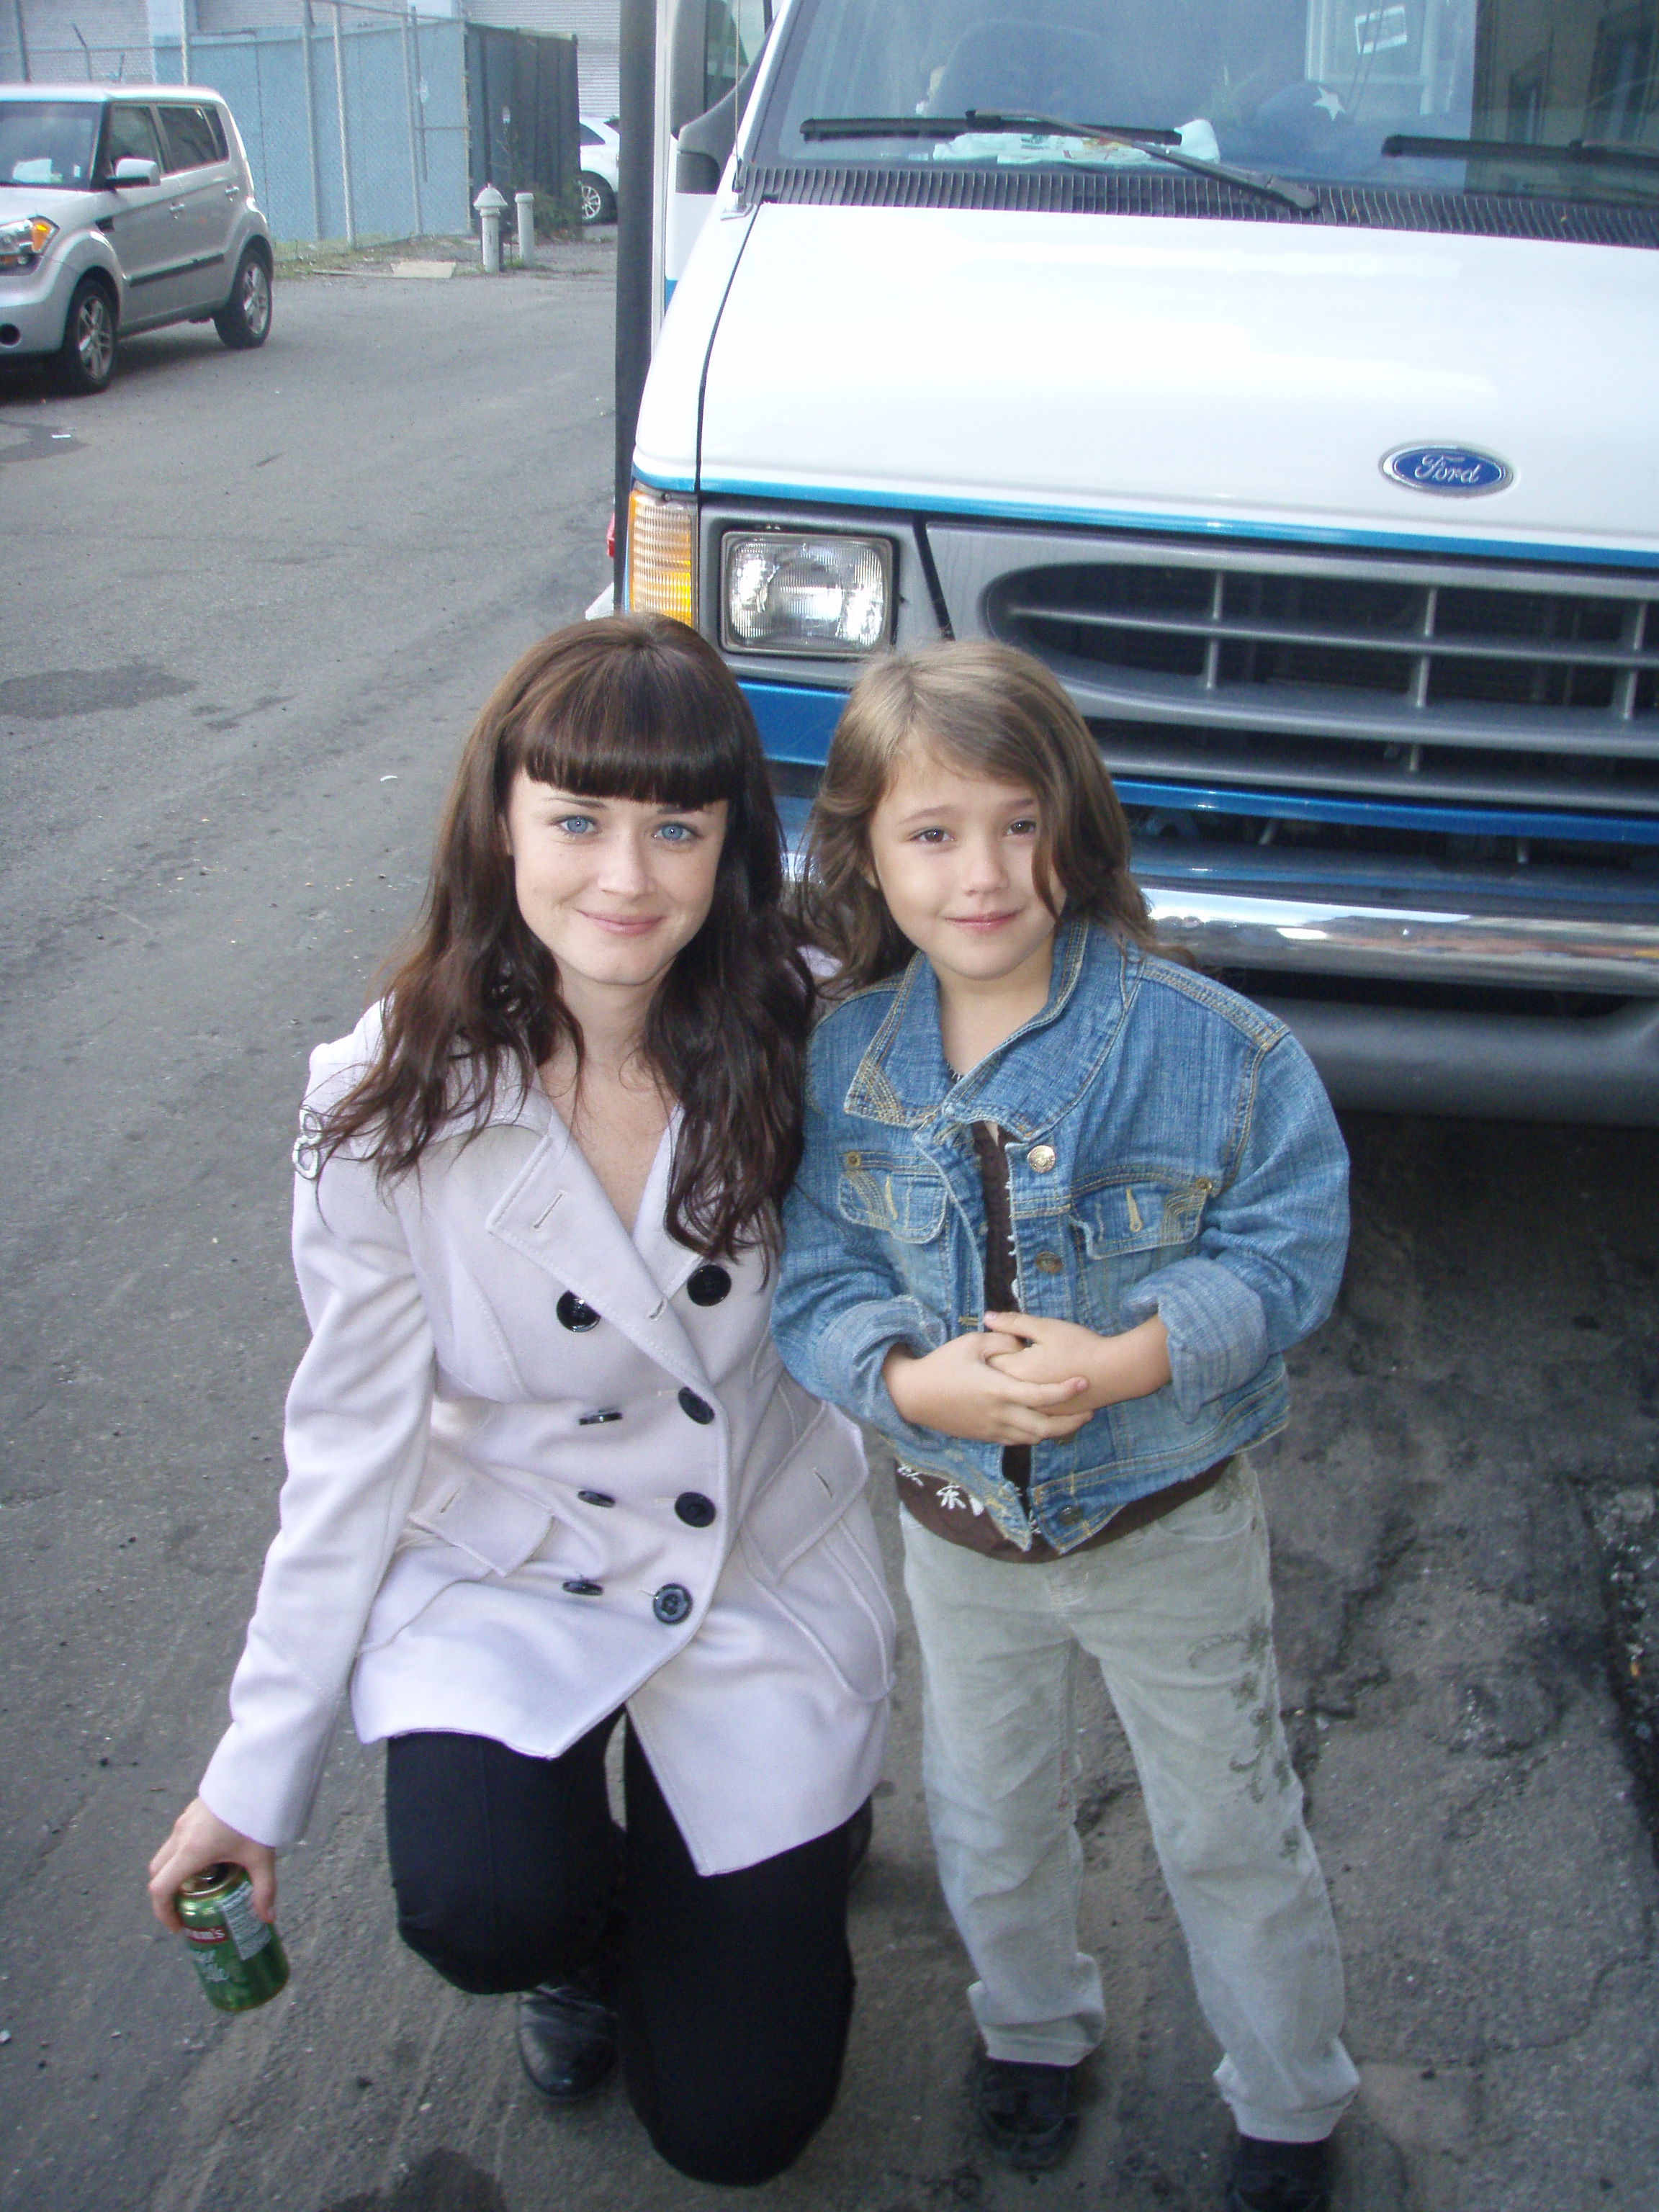 Breanna And Alexis Bledel on Violet & Daisy Shoot